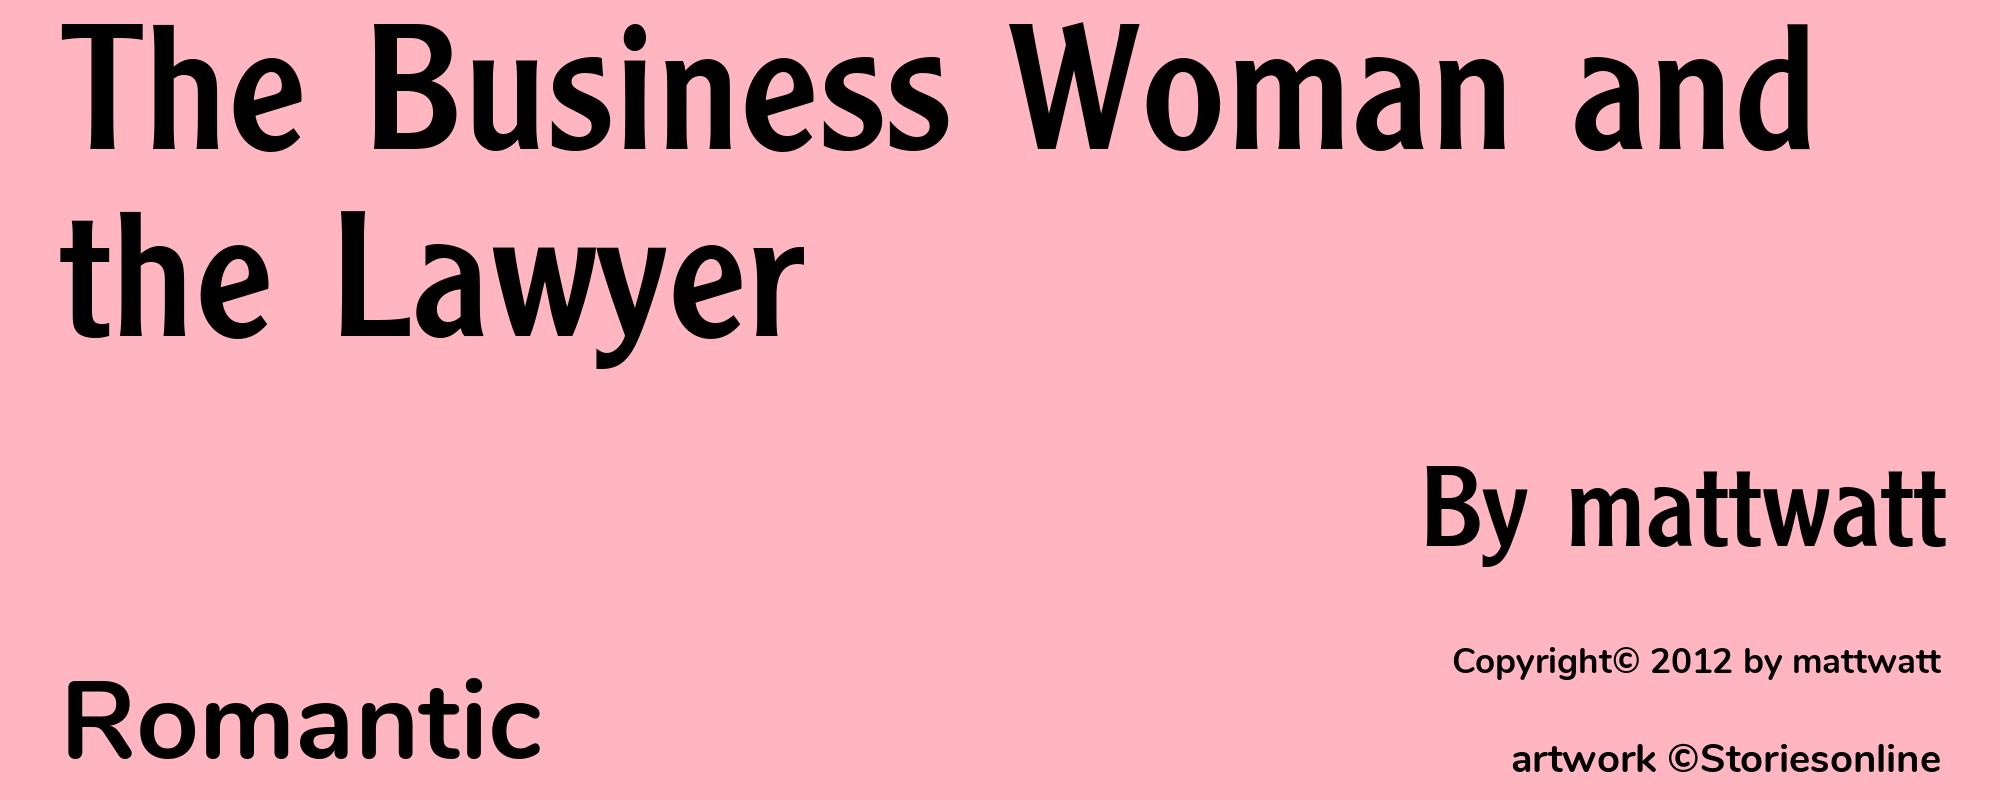 The Business Woman and the Lawyer - Cover